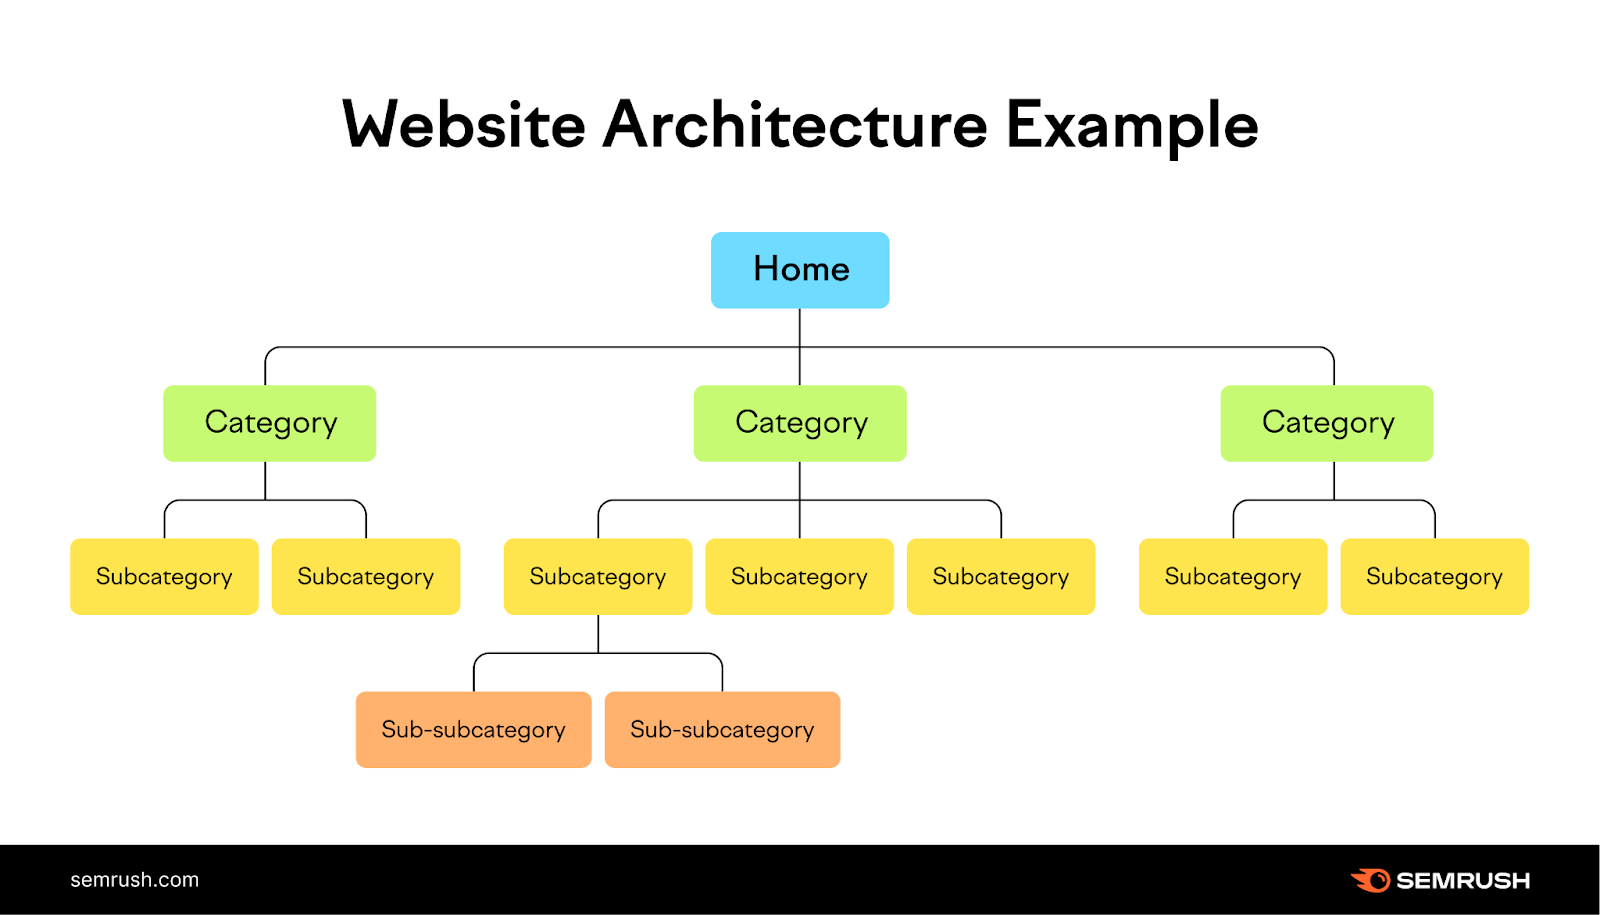 Website architecture example starts with the homepage branching out to category pages then subcategory pages.